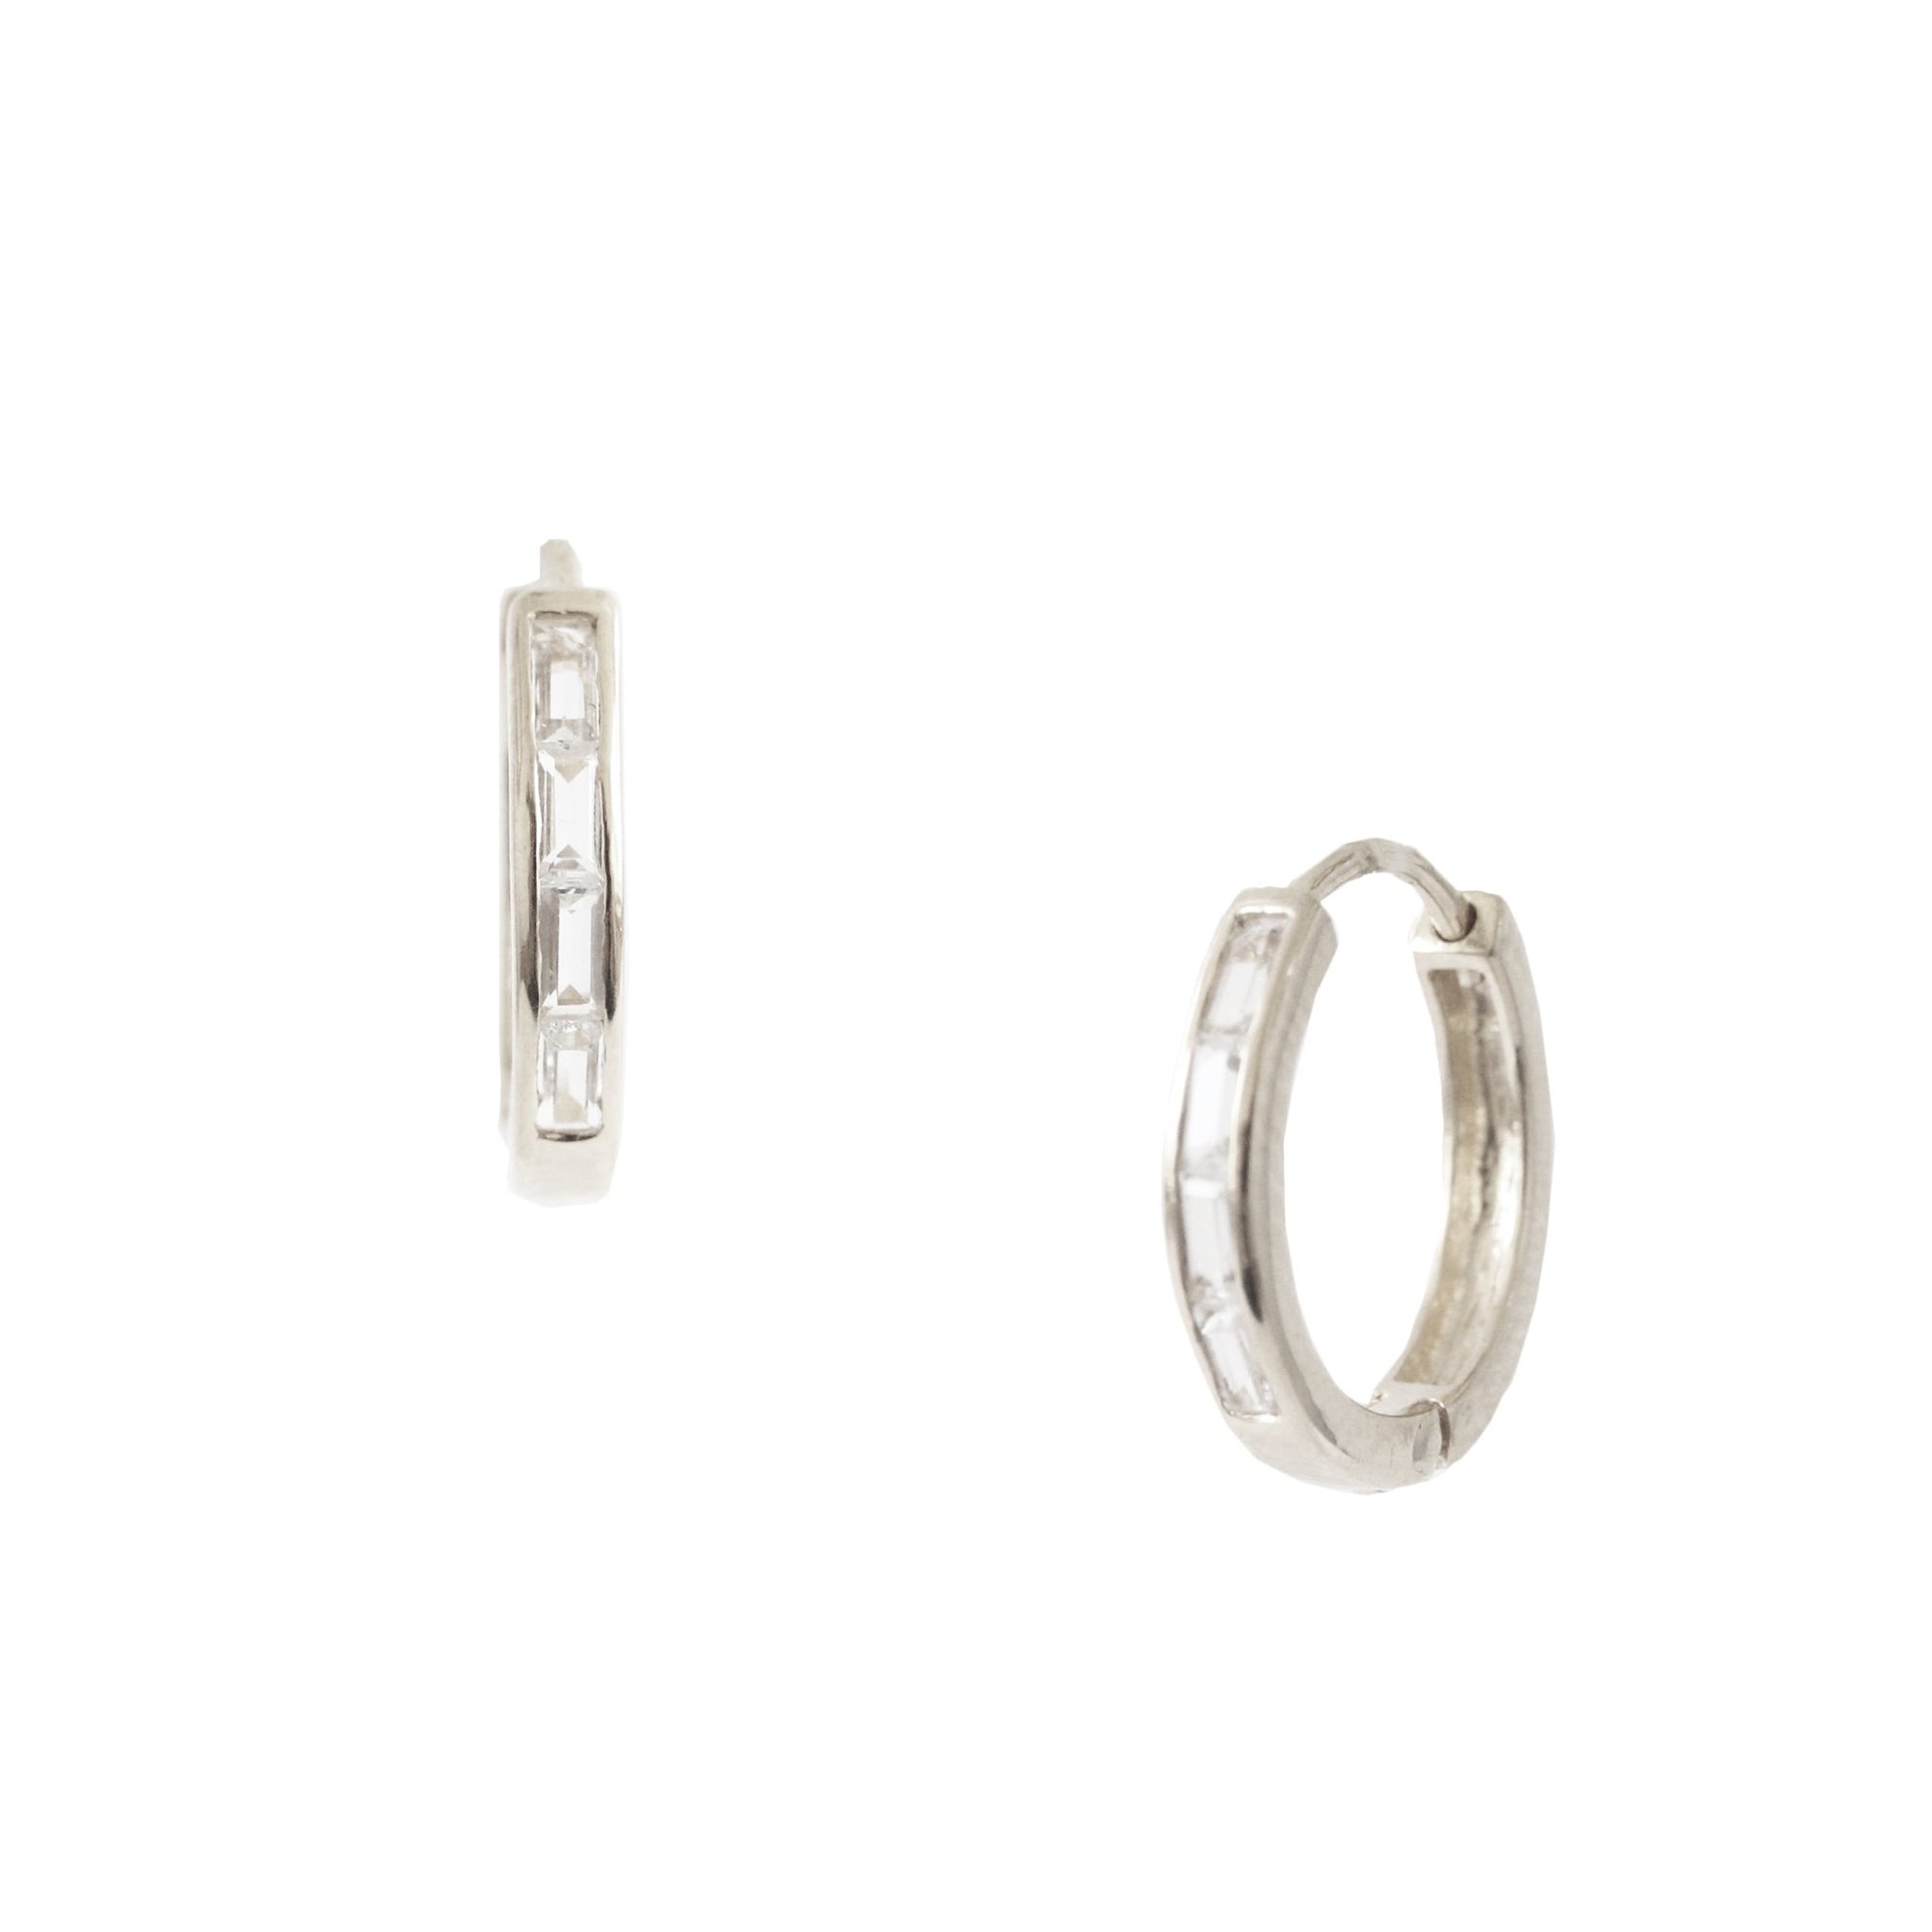 Loyal Channel Huggie Hoops - White Topaz & Silver - SO PRETTY CARA COTTER